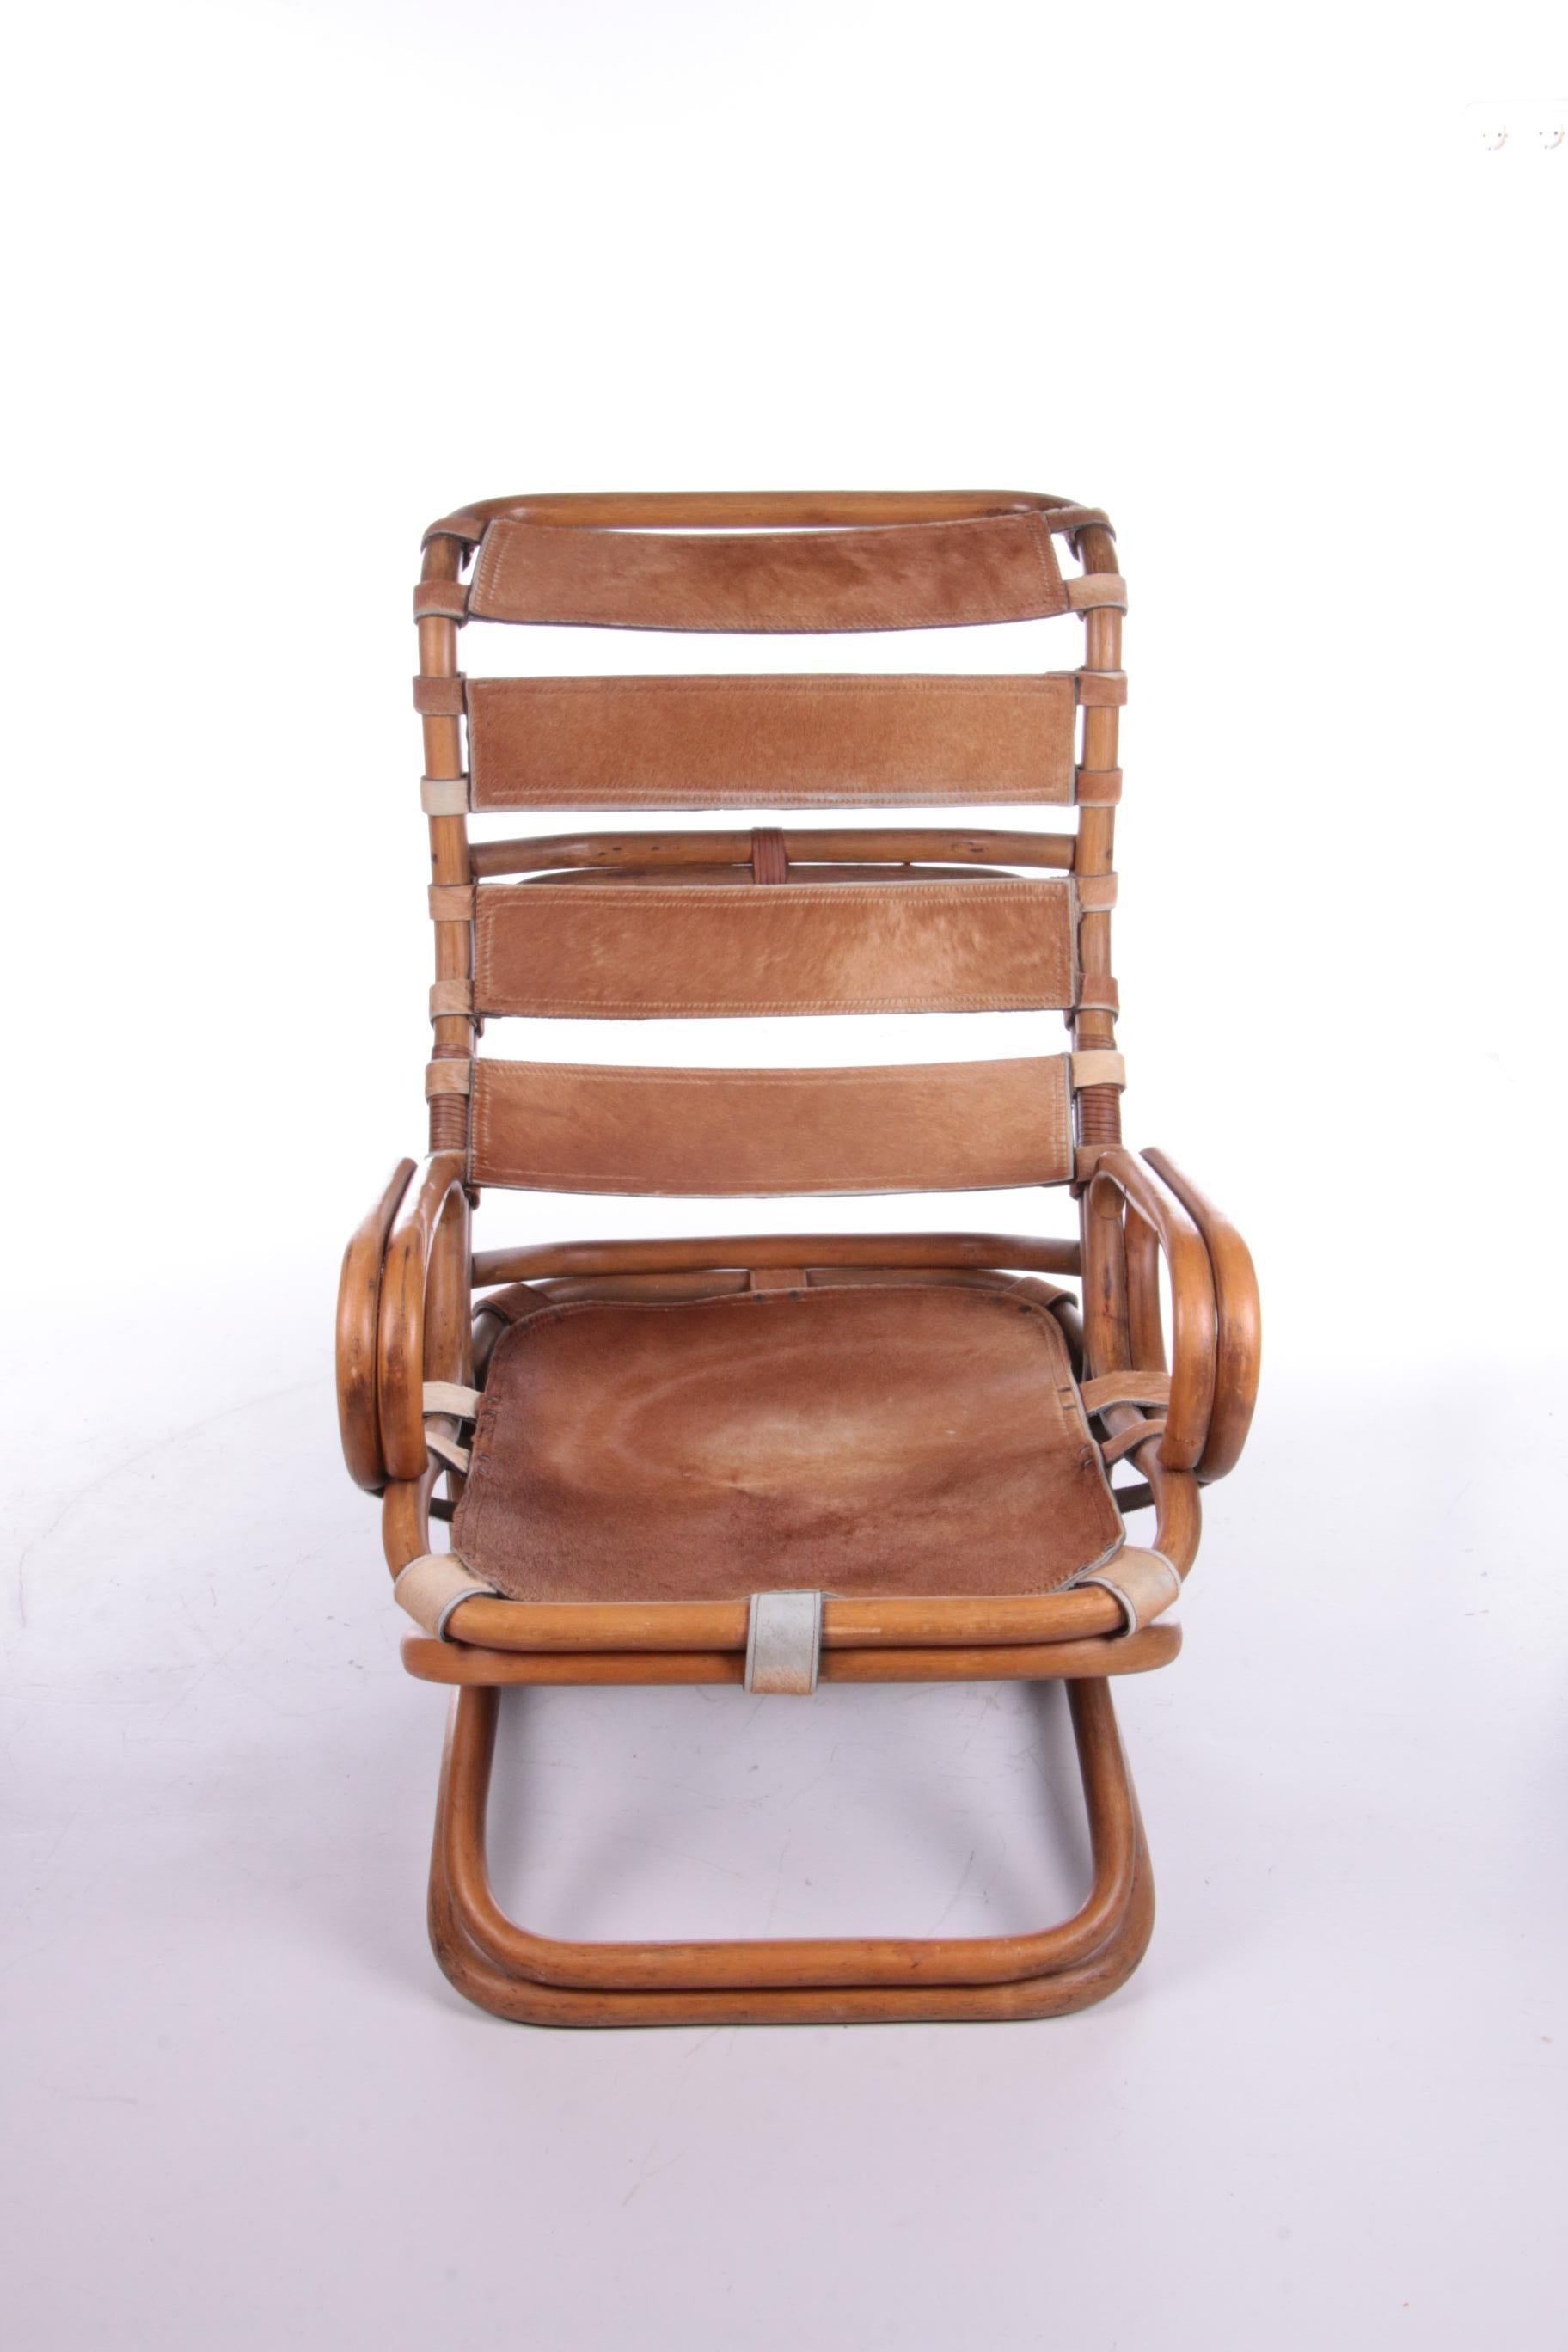 Mid-Century Modern Tito Agnoli Relax Chair Made of Bamboo and Leather, 1960 For Sale